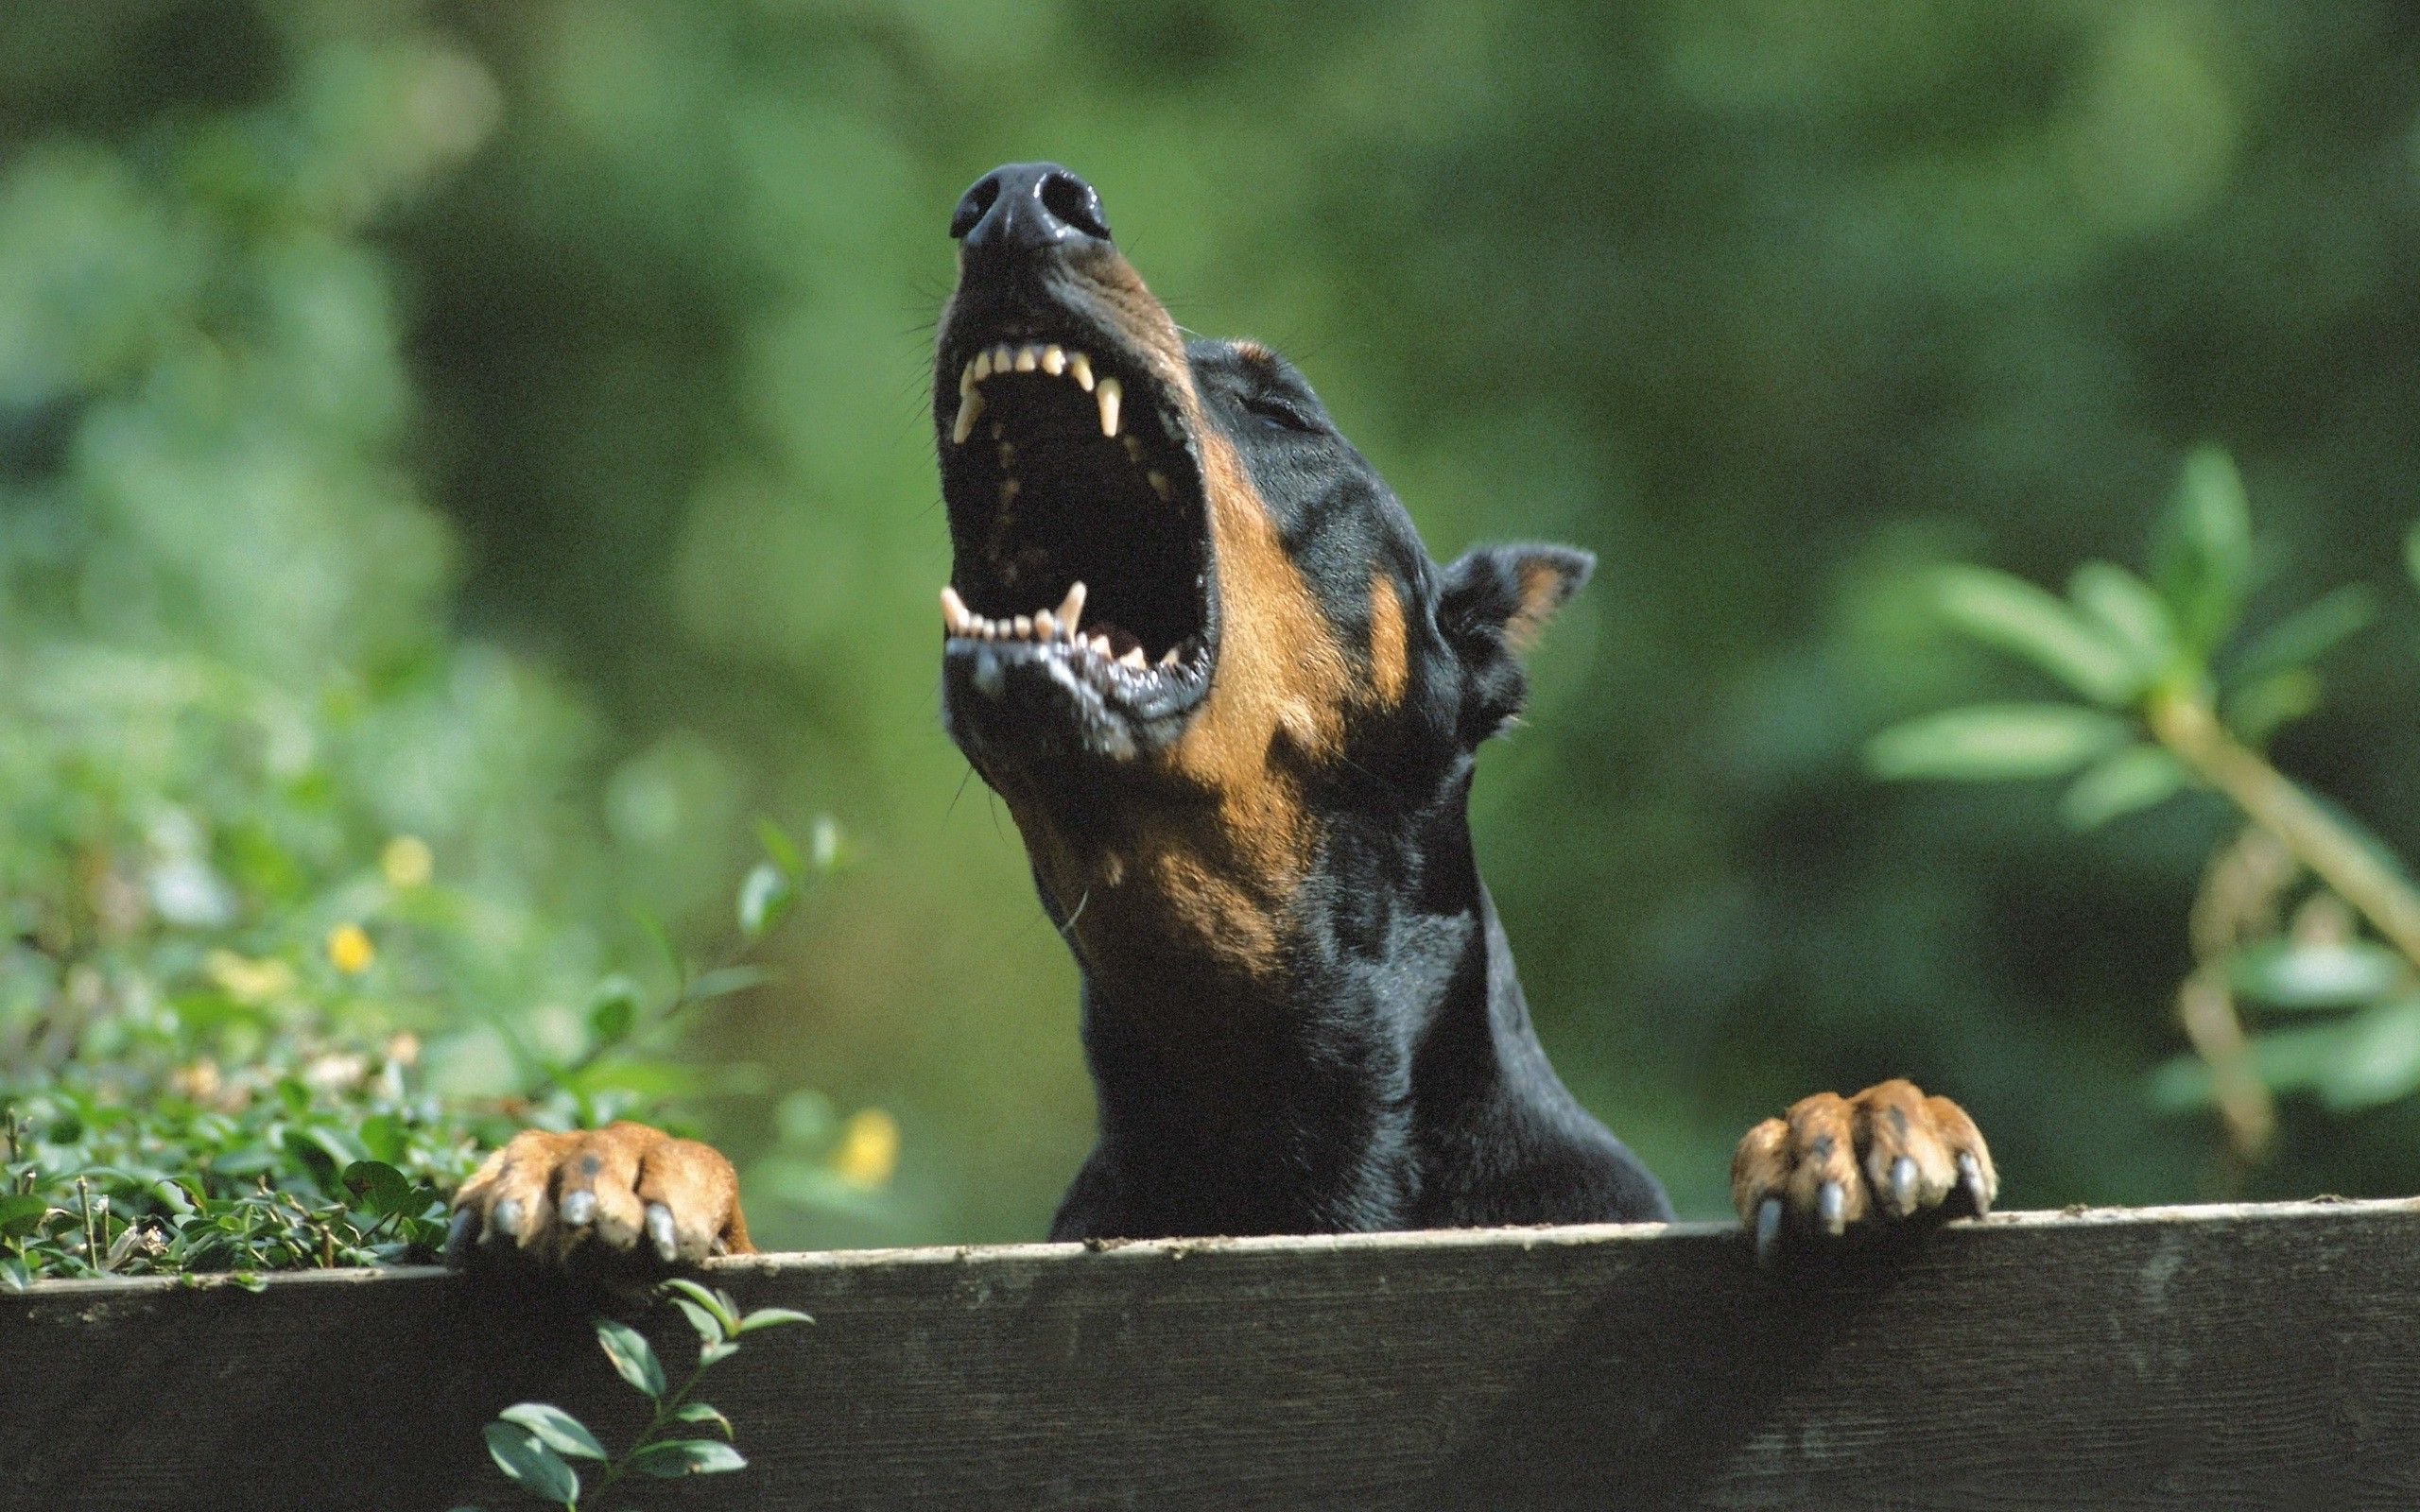 How to Spot When Dogs Get Angry